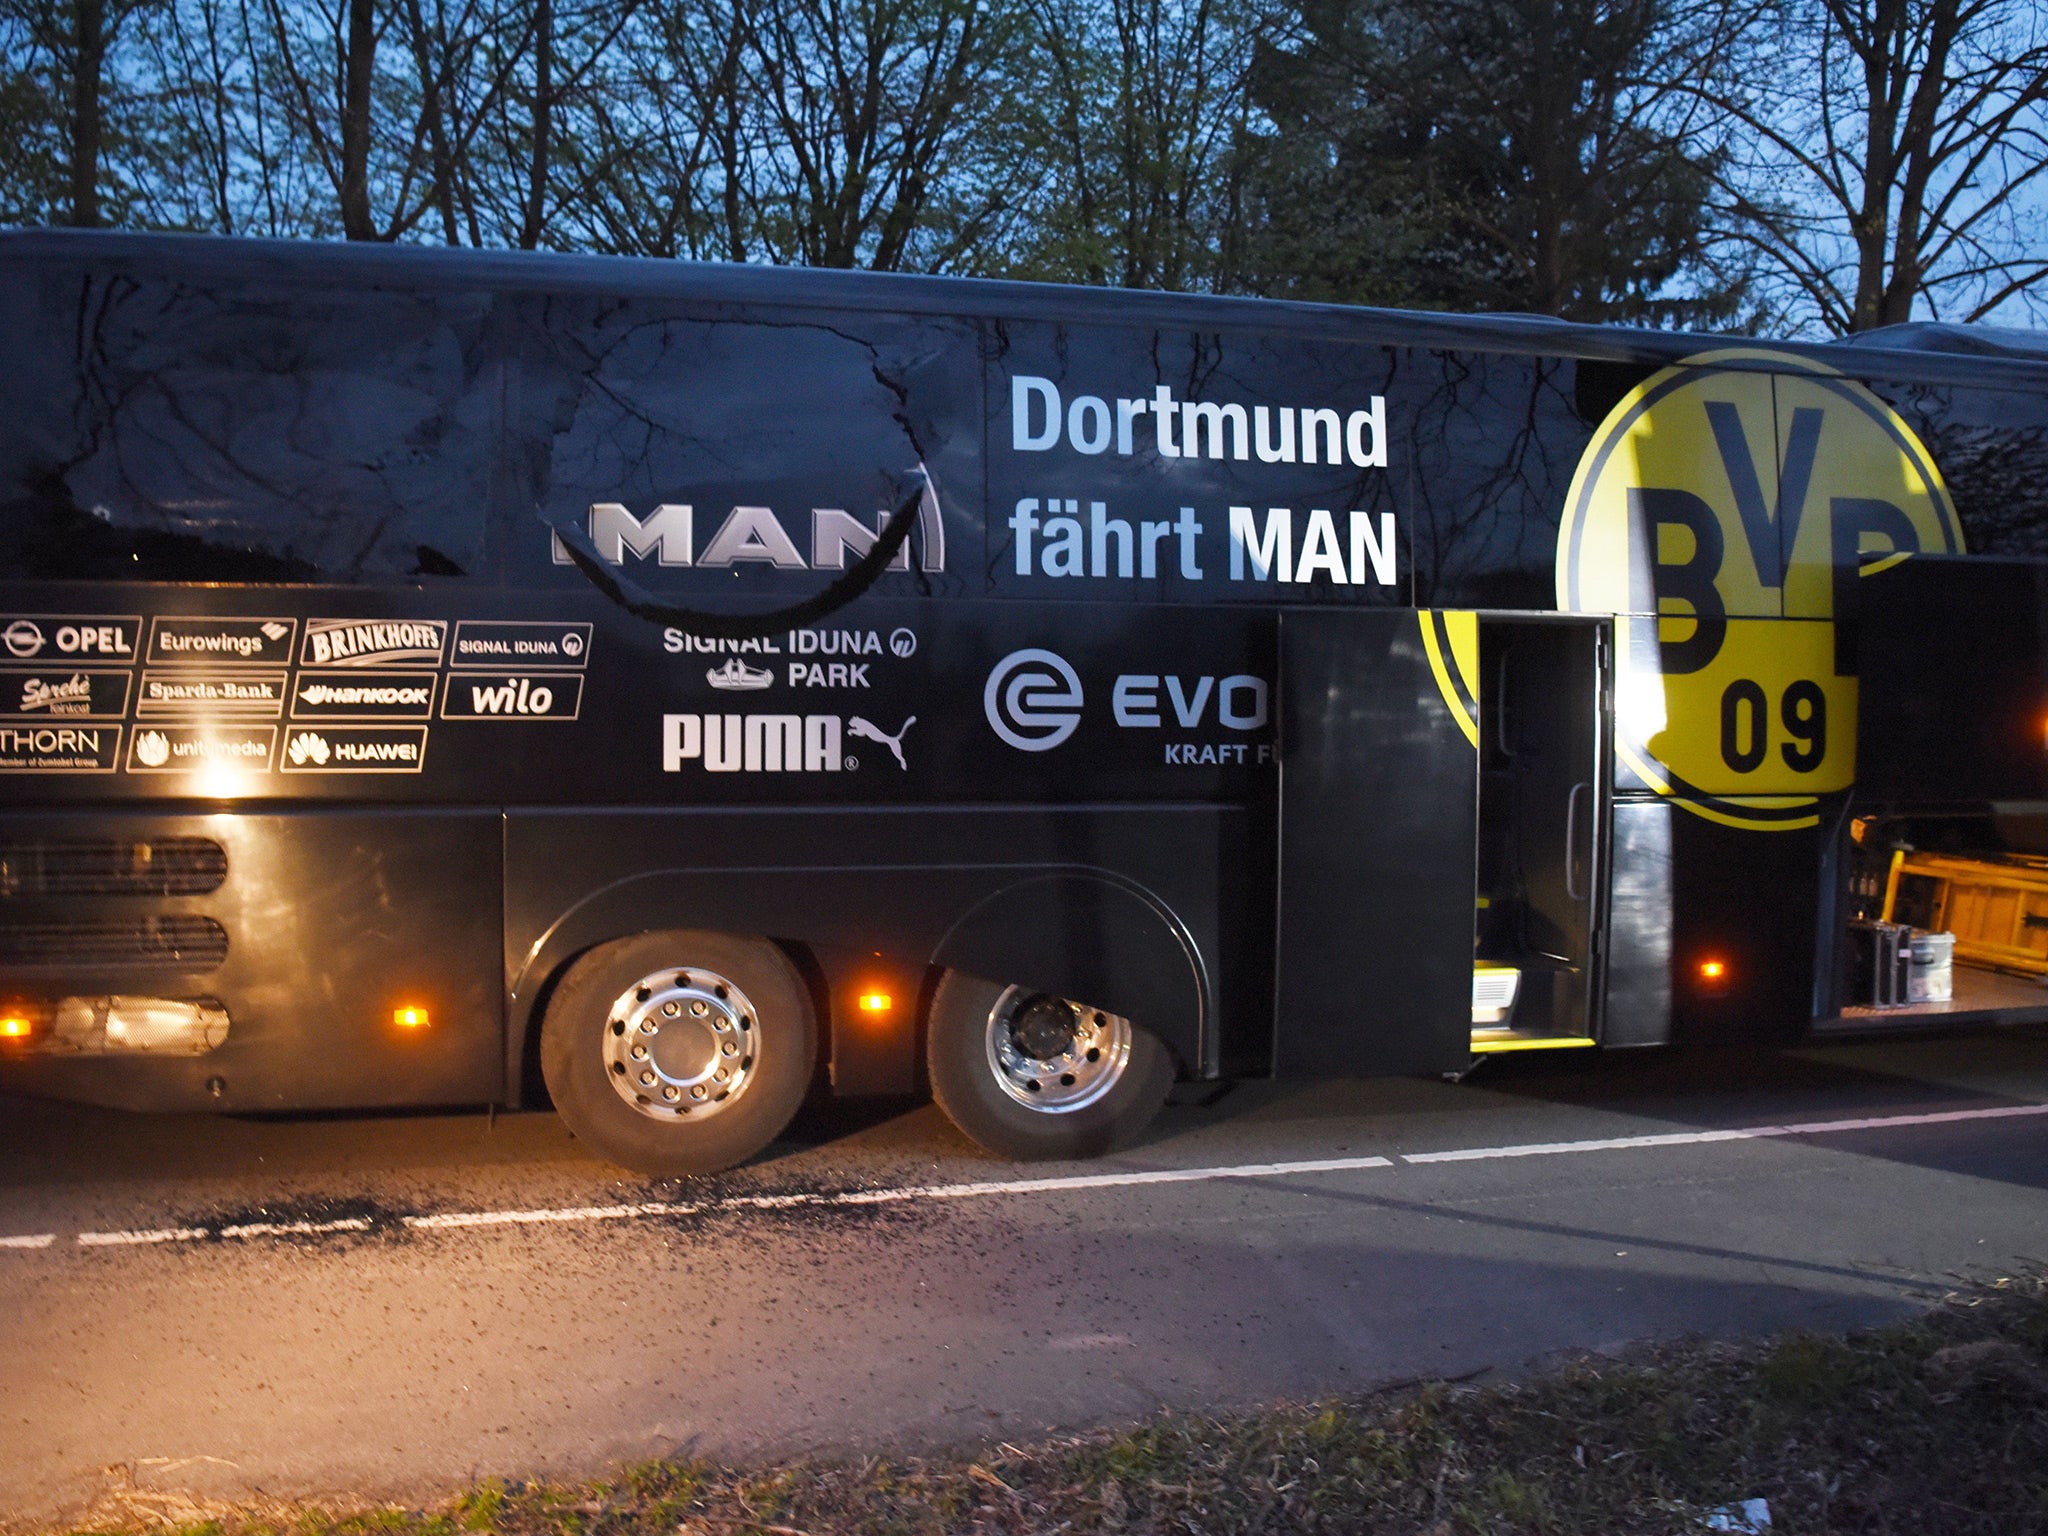 Three explosions went off nearby Dortmund's bus, shattering windows